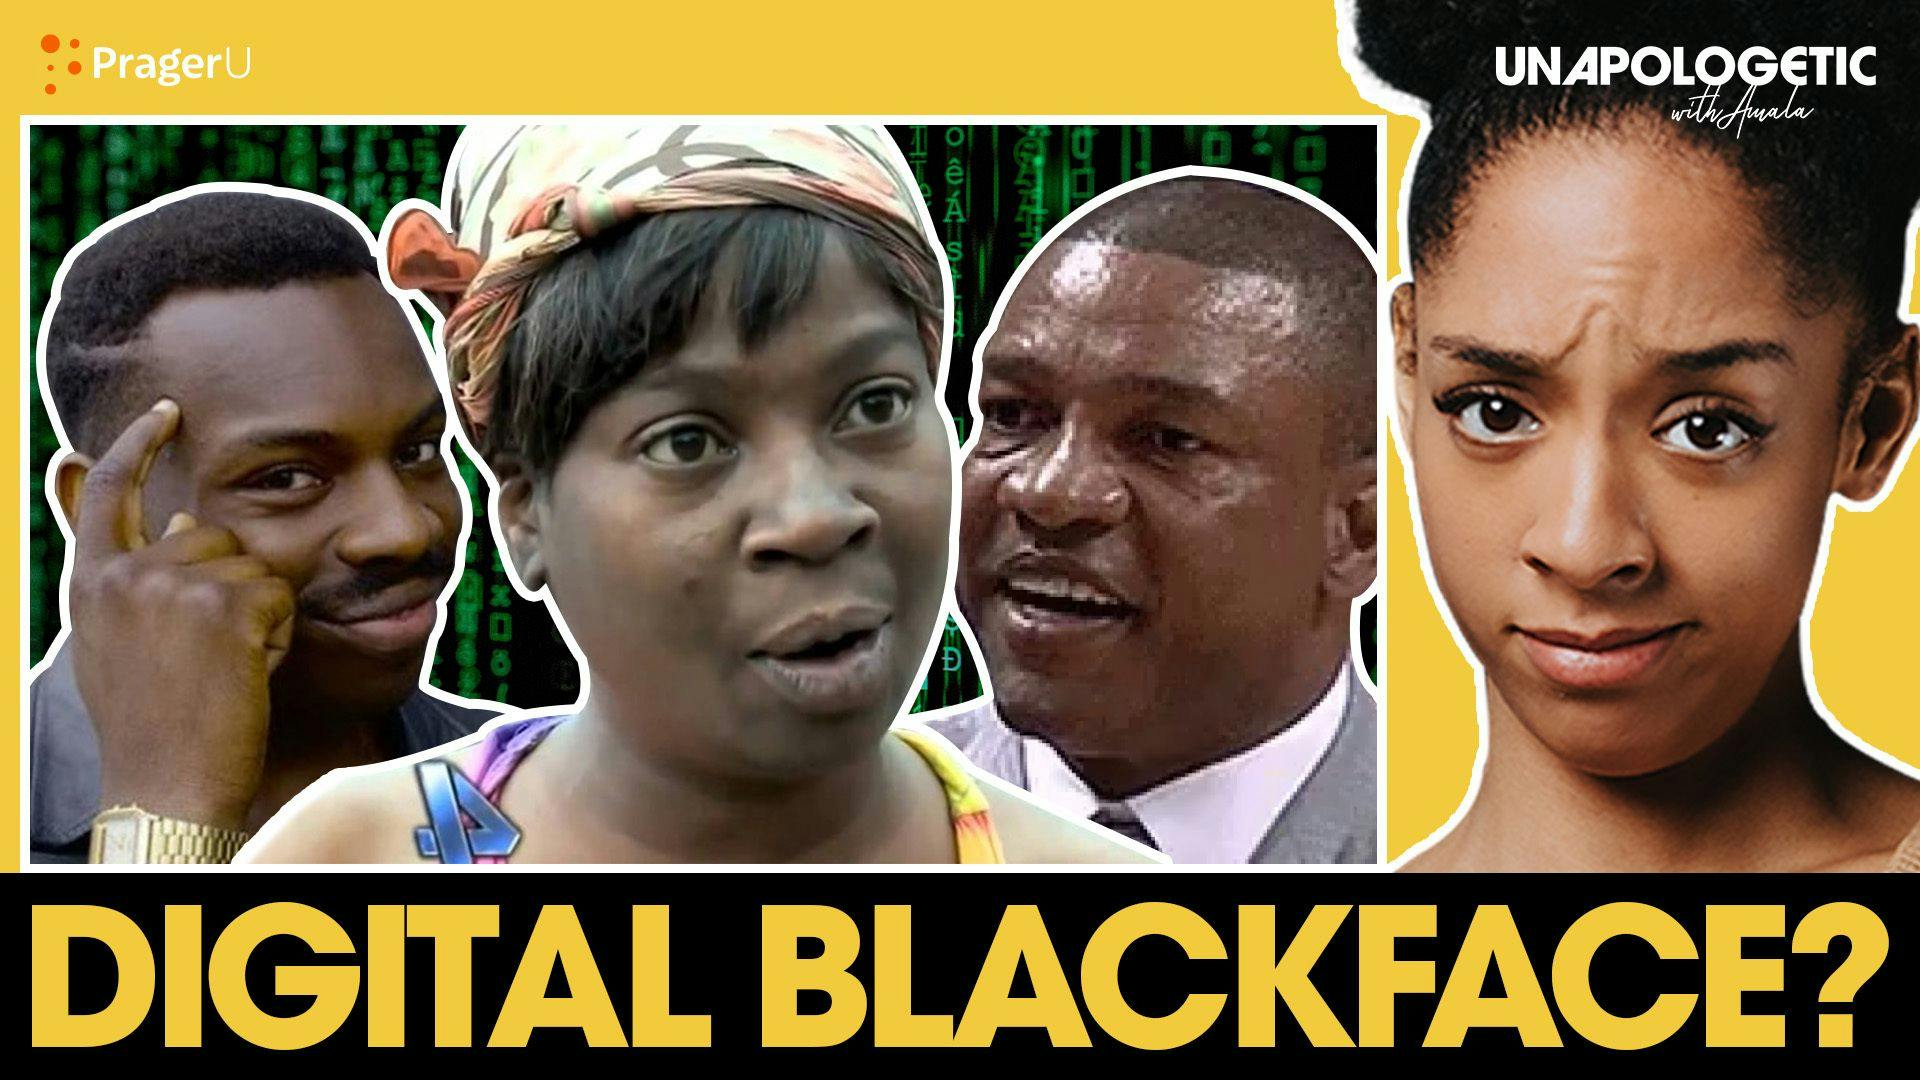 Are You Guilty of “Digital Blackface”?